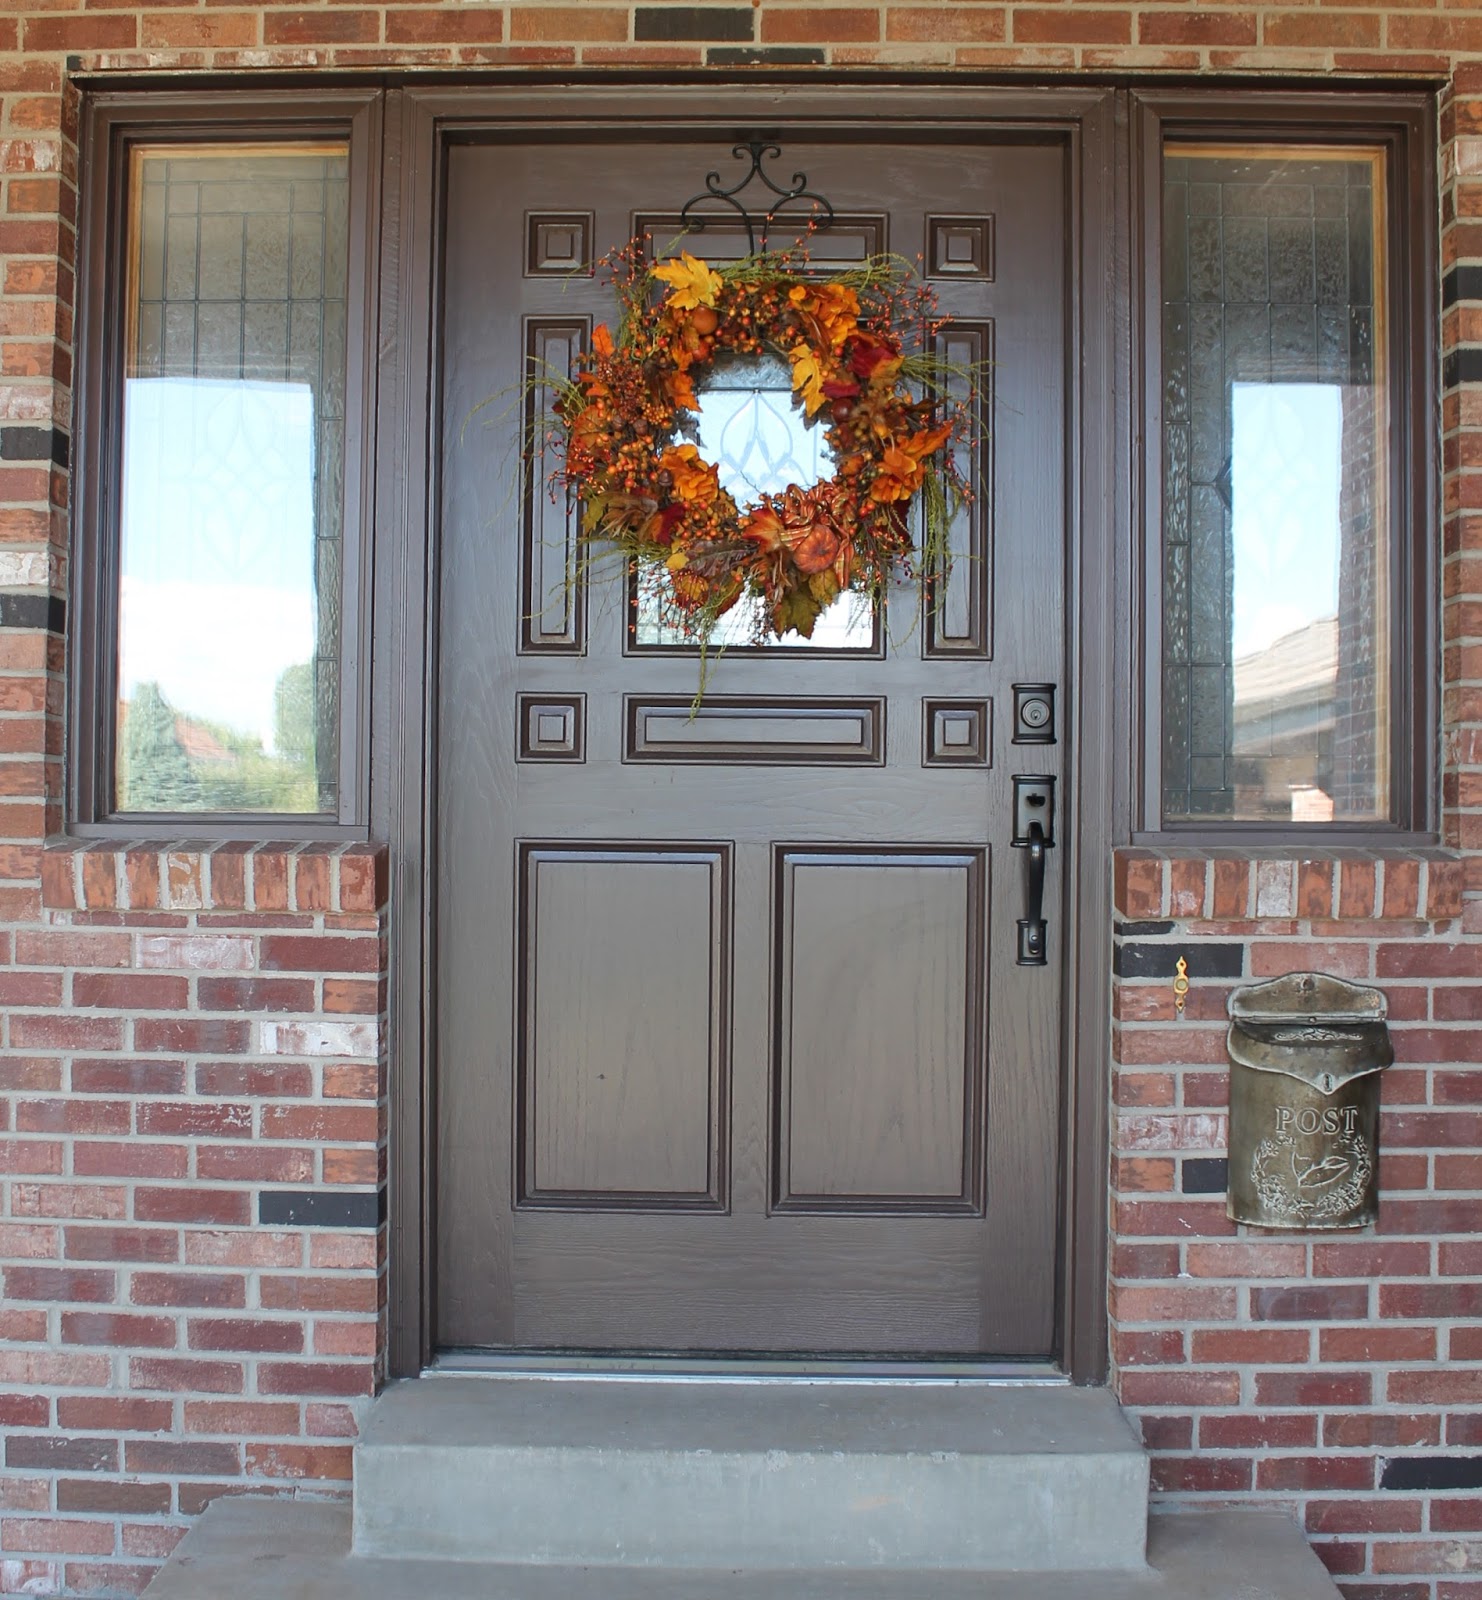 Southern Seazons: Revamping a Fall wreath and what's hidding in the cabinet